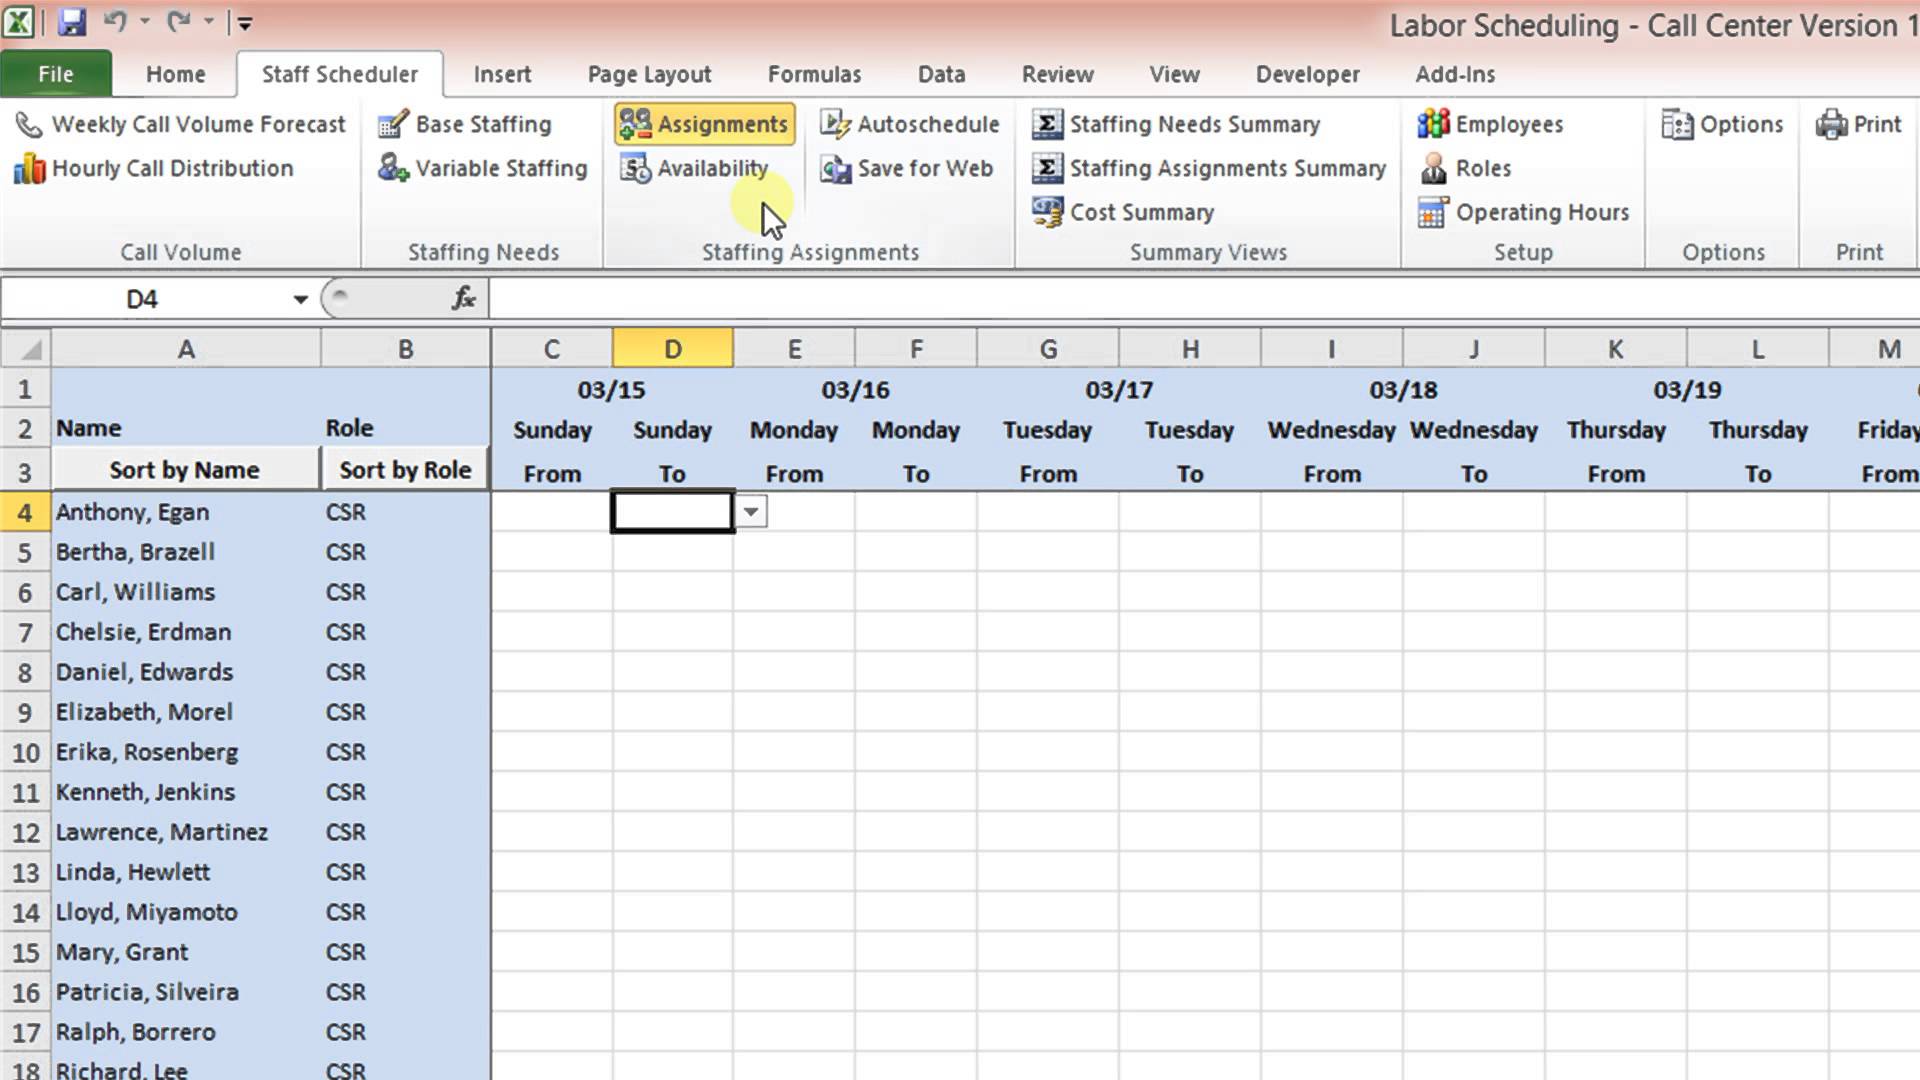 Labor Scheduling Template for Excel Call Center Version Overview 